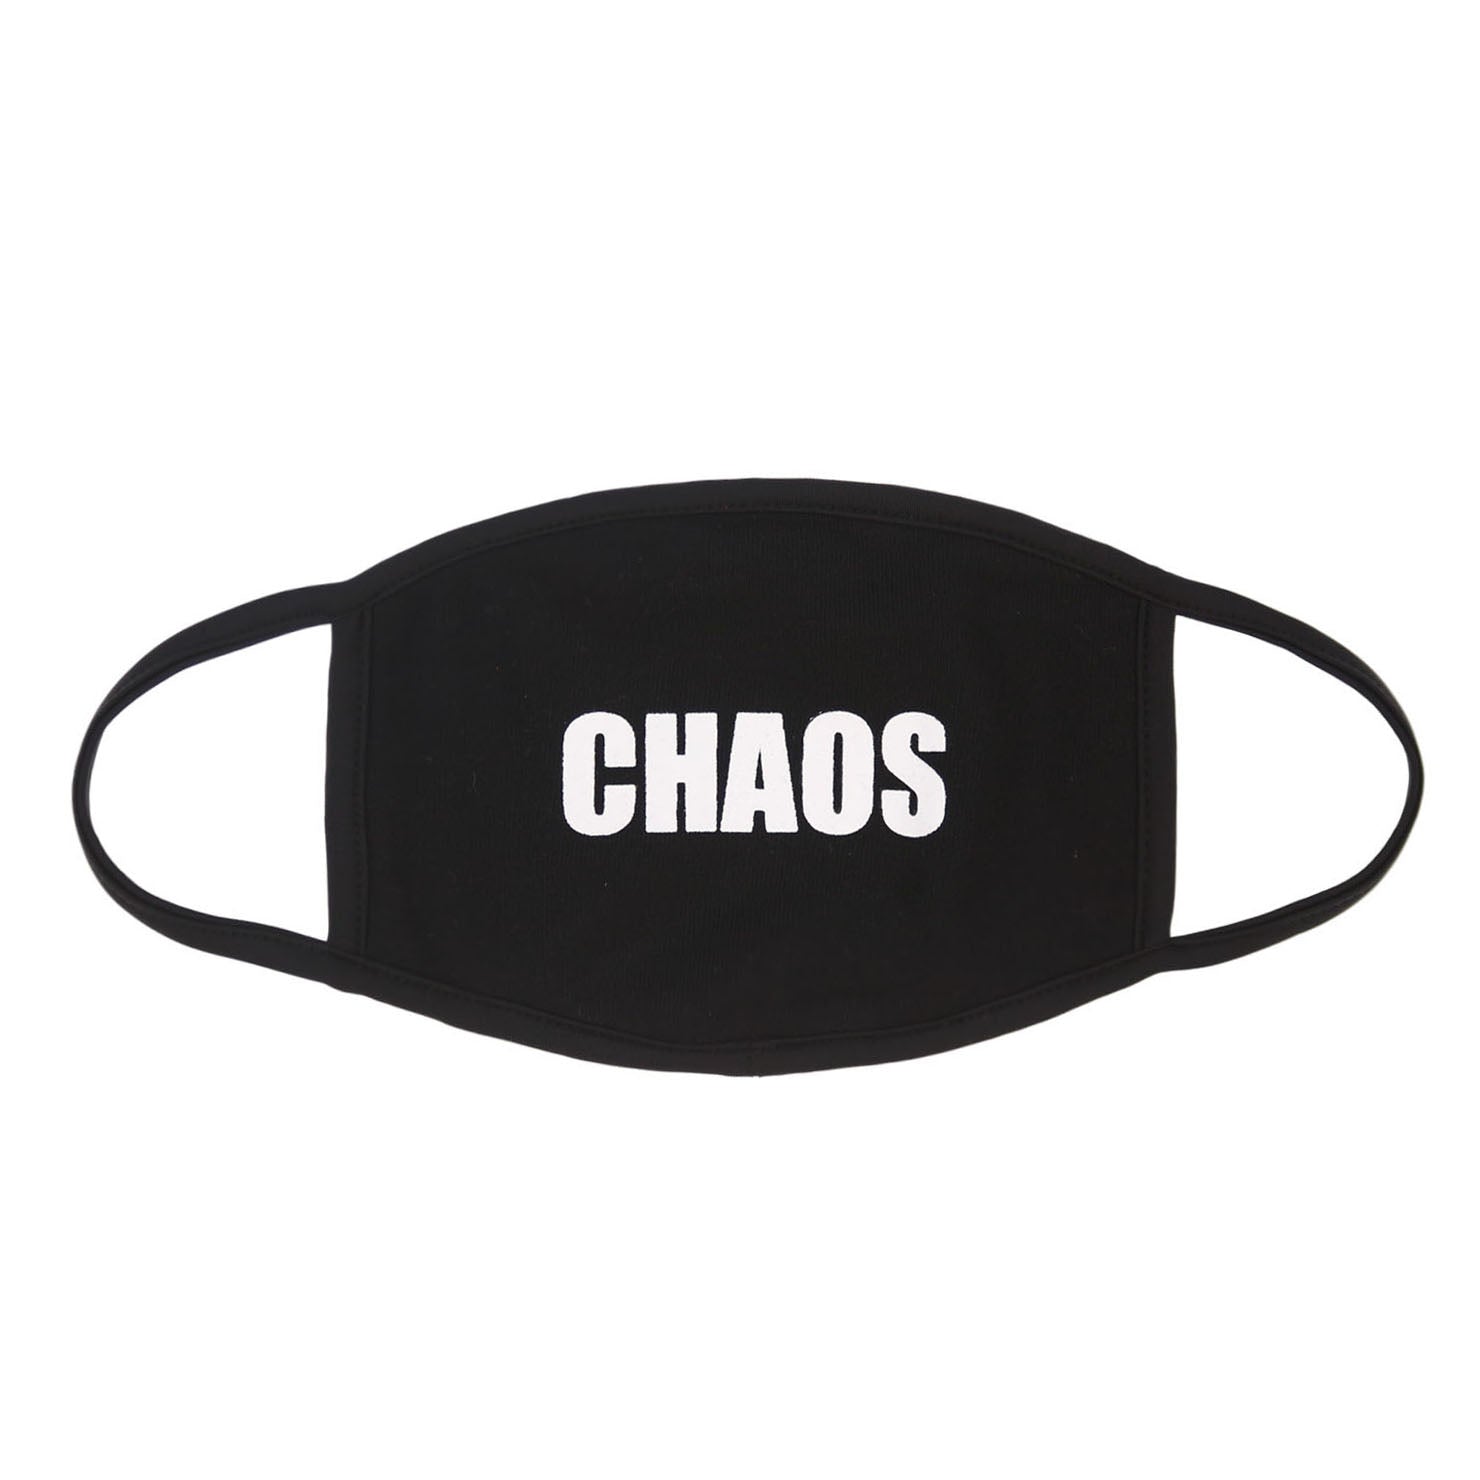 MUST DIE! CHAOS FACE MASK